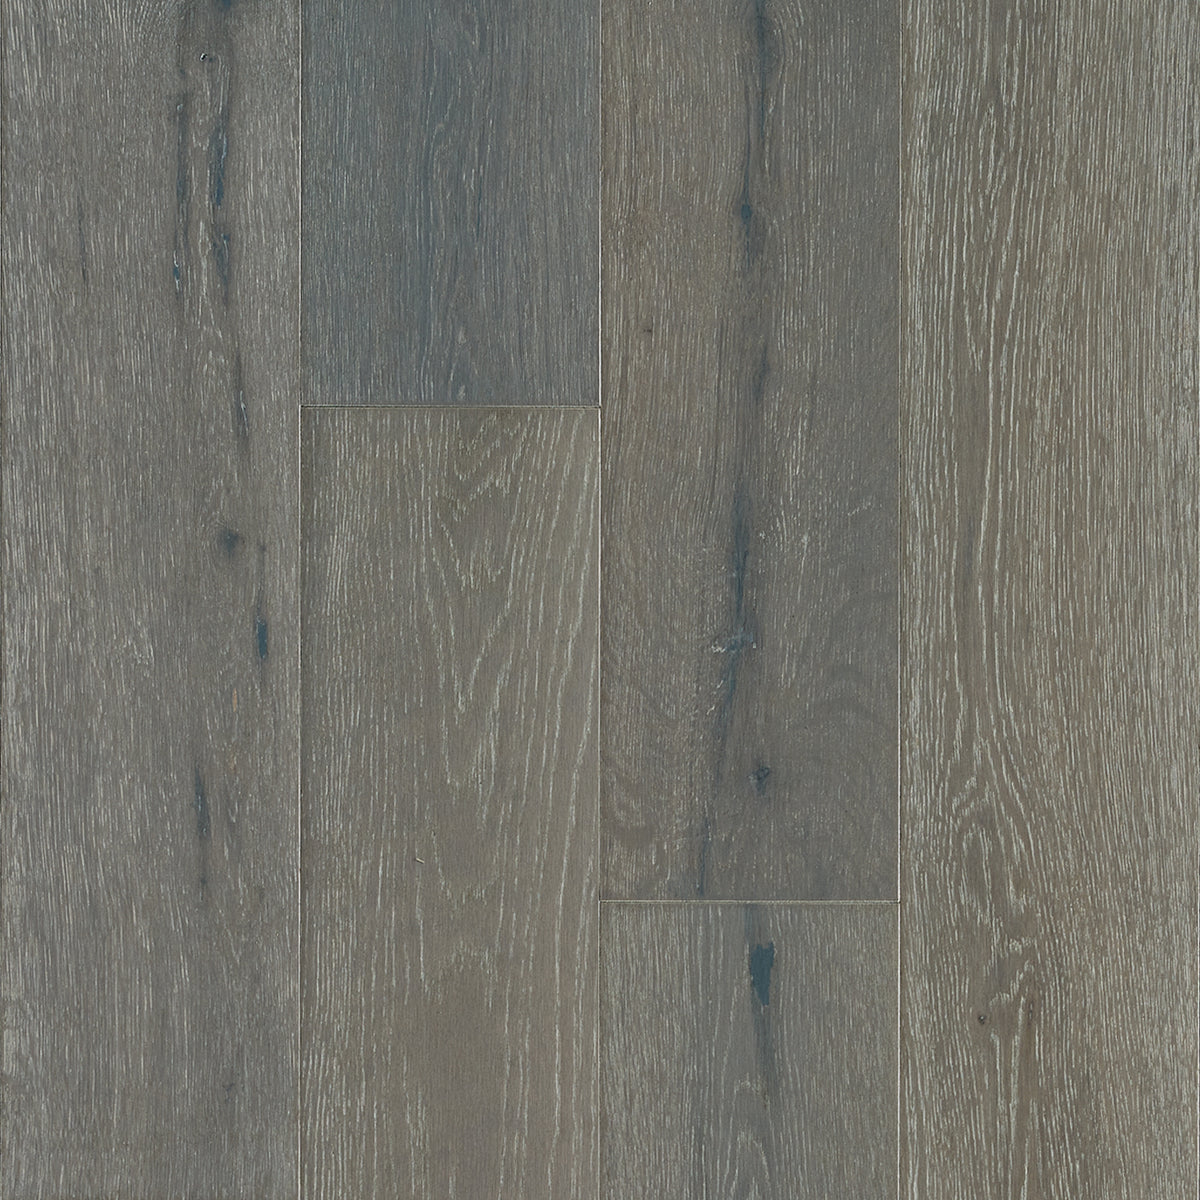 Bruce - Brushed Impressions Silver Collection - 6.5 in. Oak Hardwood - Seashade Clouds